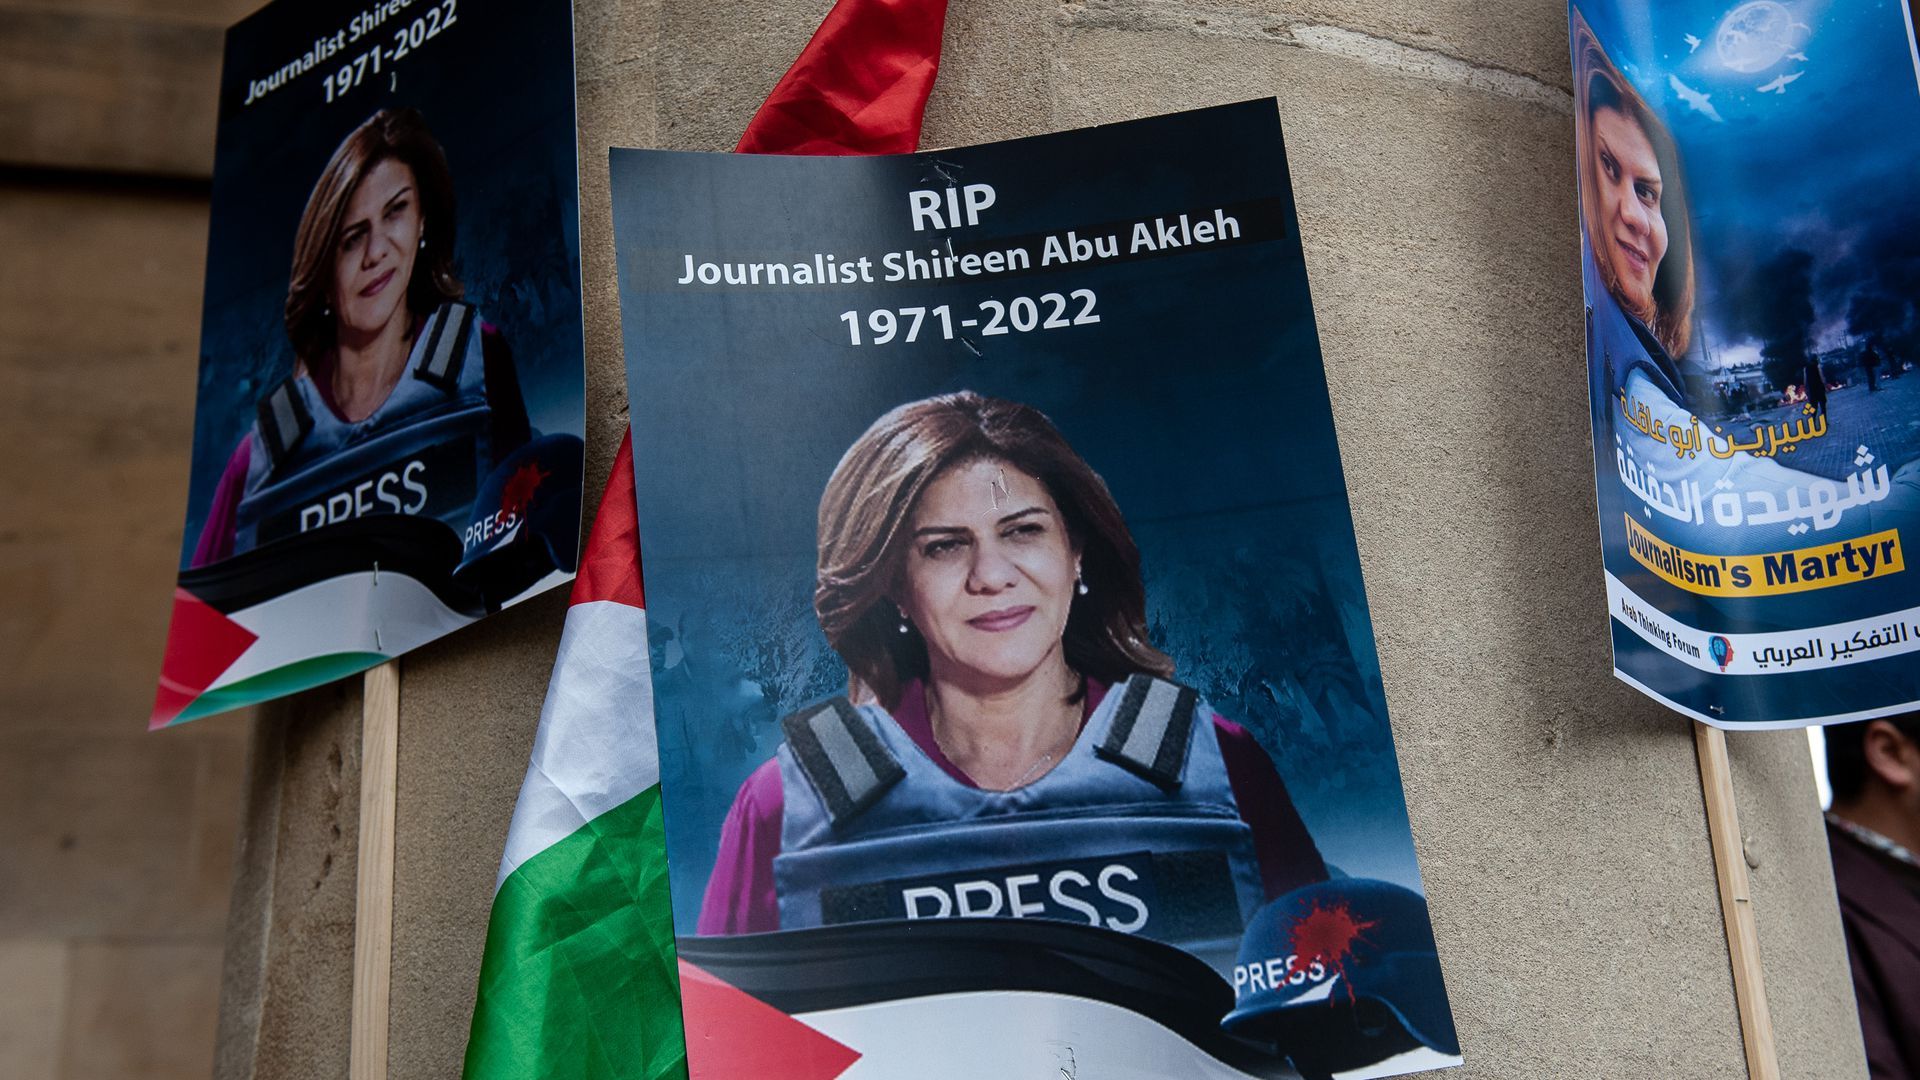 Posters showing the image of Palestinian American journalist Shireen Abu Akleh. Photo: Guy Smallman/Getty Images